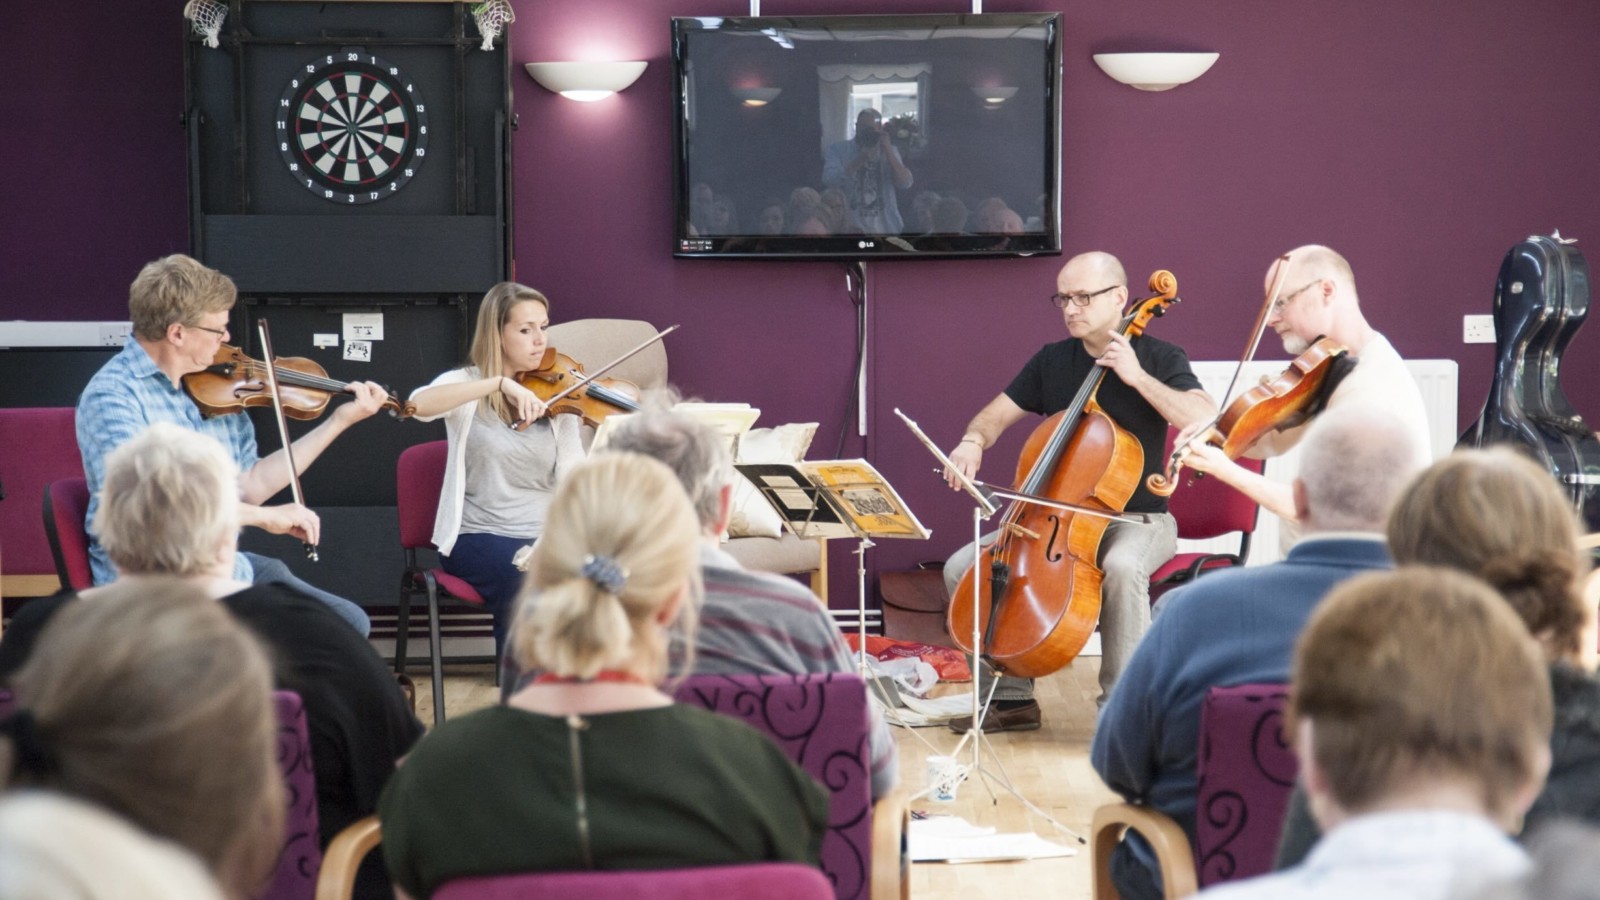 In a large room with purple walls, a dartboard and a TV on the wall sit 4 people playing instruments. Two playing violin and two playing cello. In front of them sit a number of people watching the musicians, with their backs to the camera.